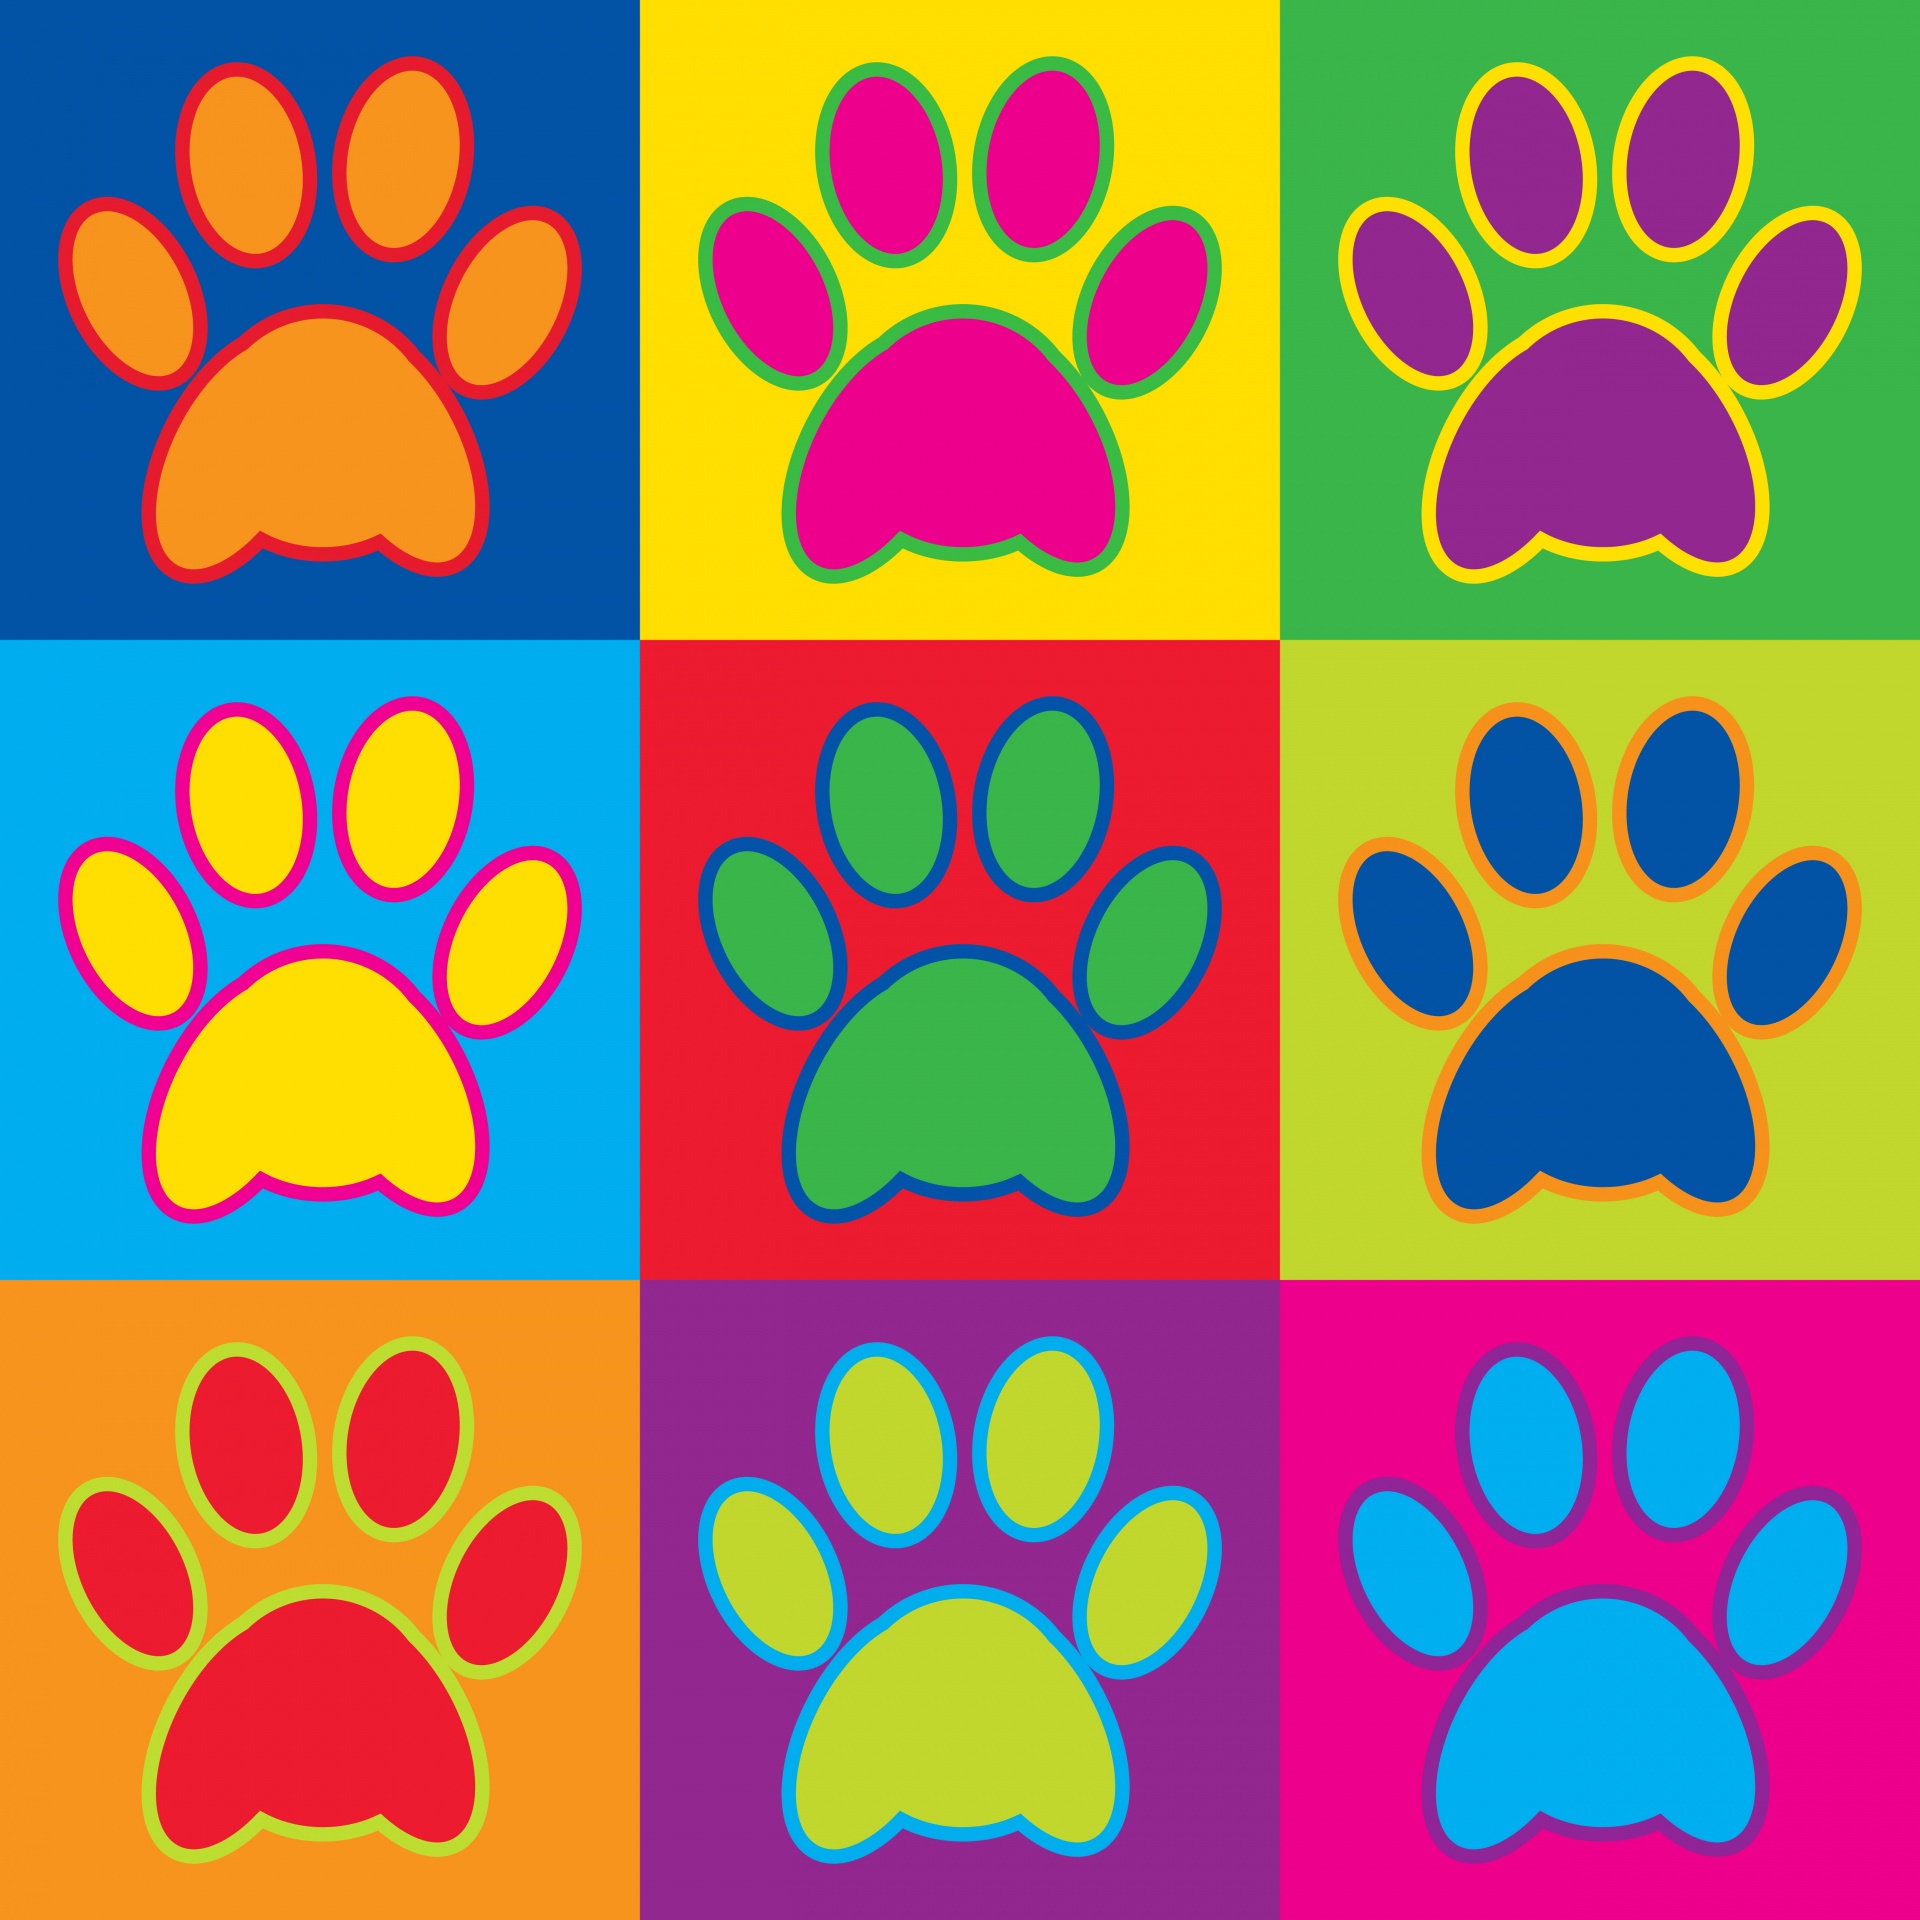 Ud over licens Fugtig Paw Prints Pop Art Free Stock Photo - Public Domain Pictures